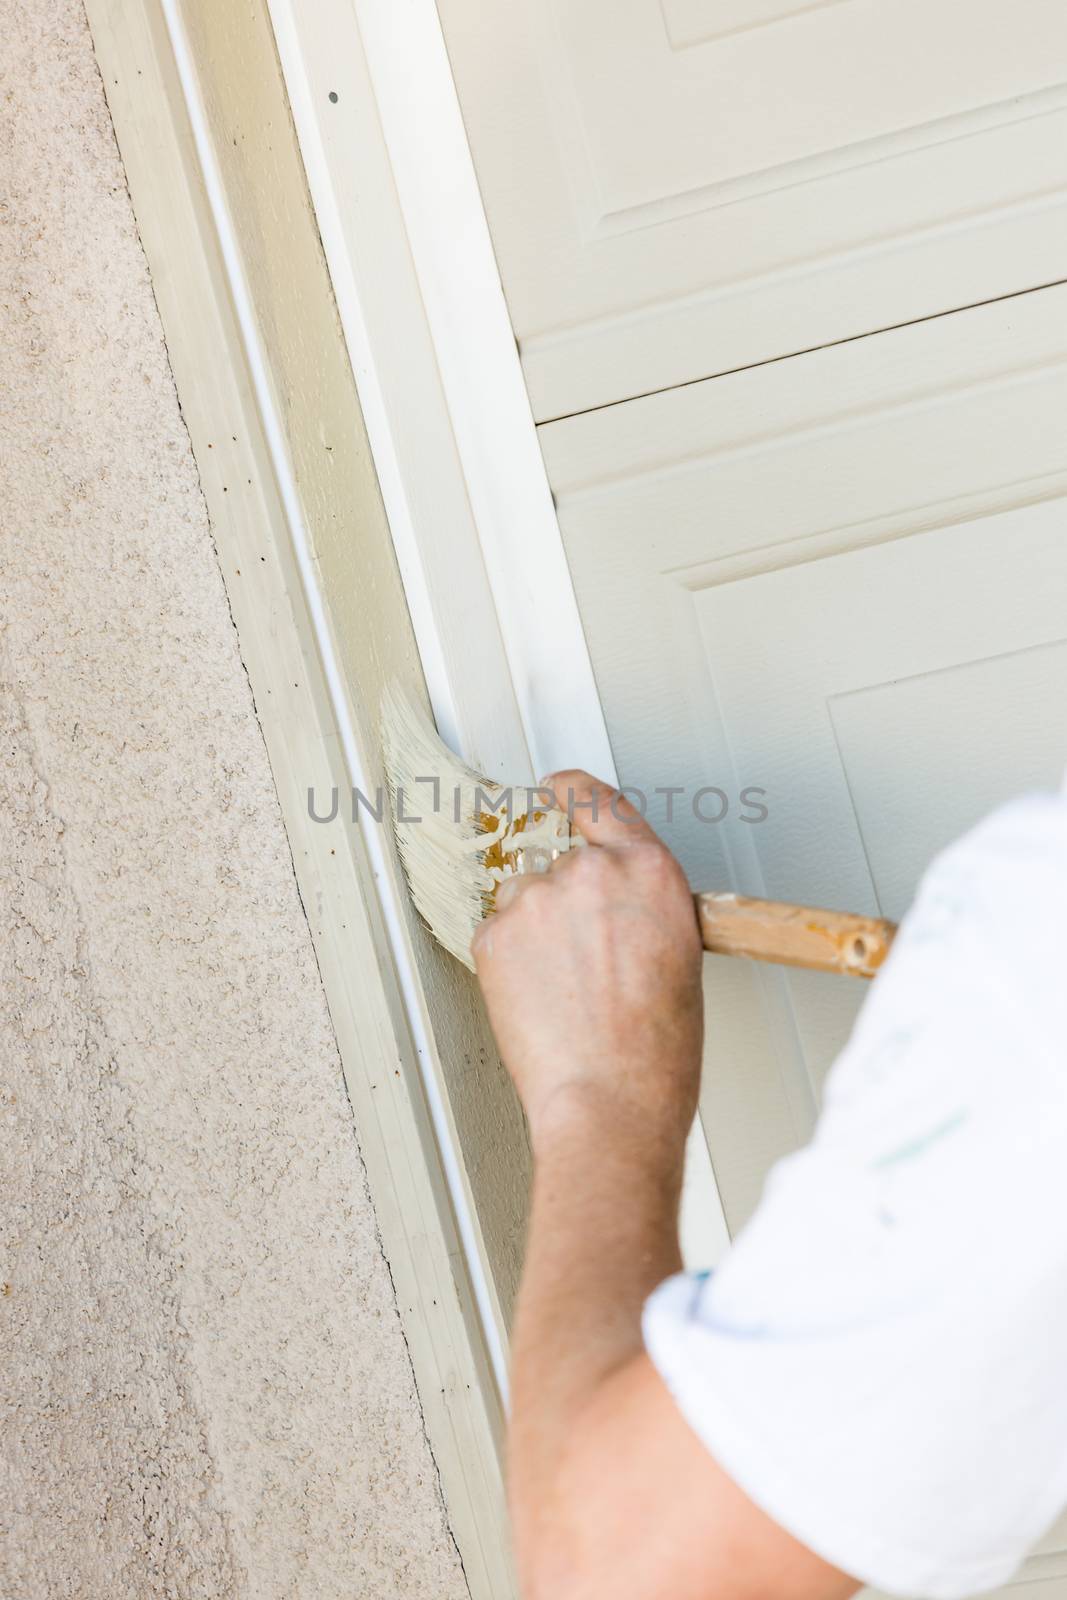 Professional Painter Cutting In With A Brush to Paint Garage Door Frame.